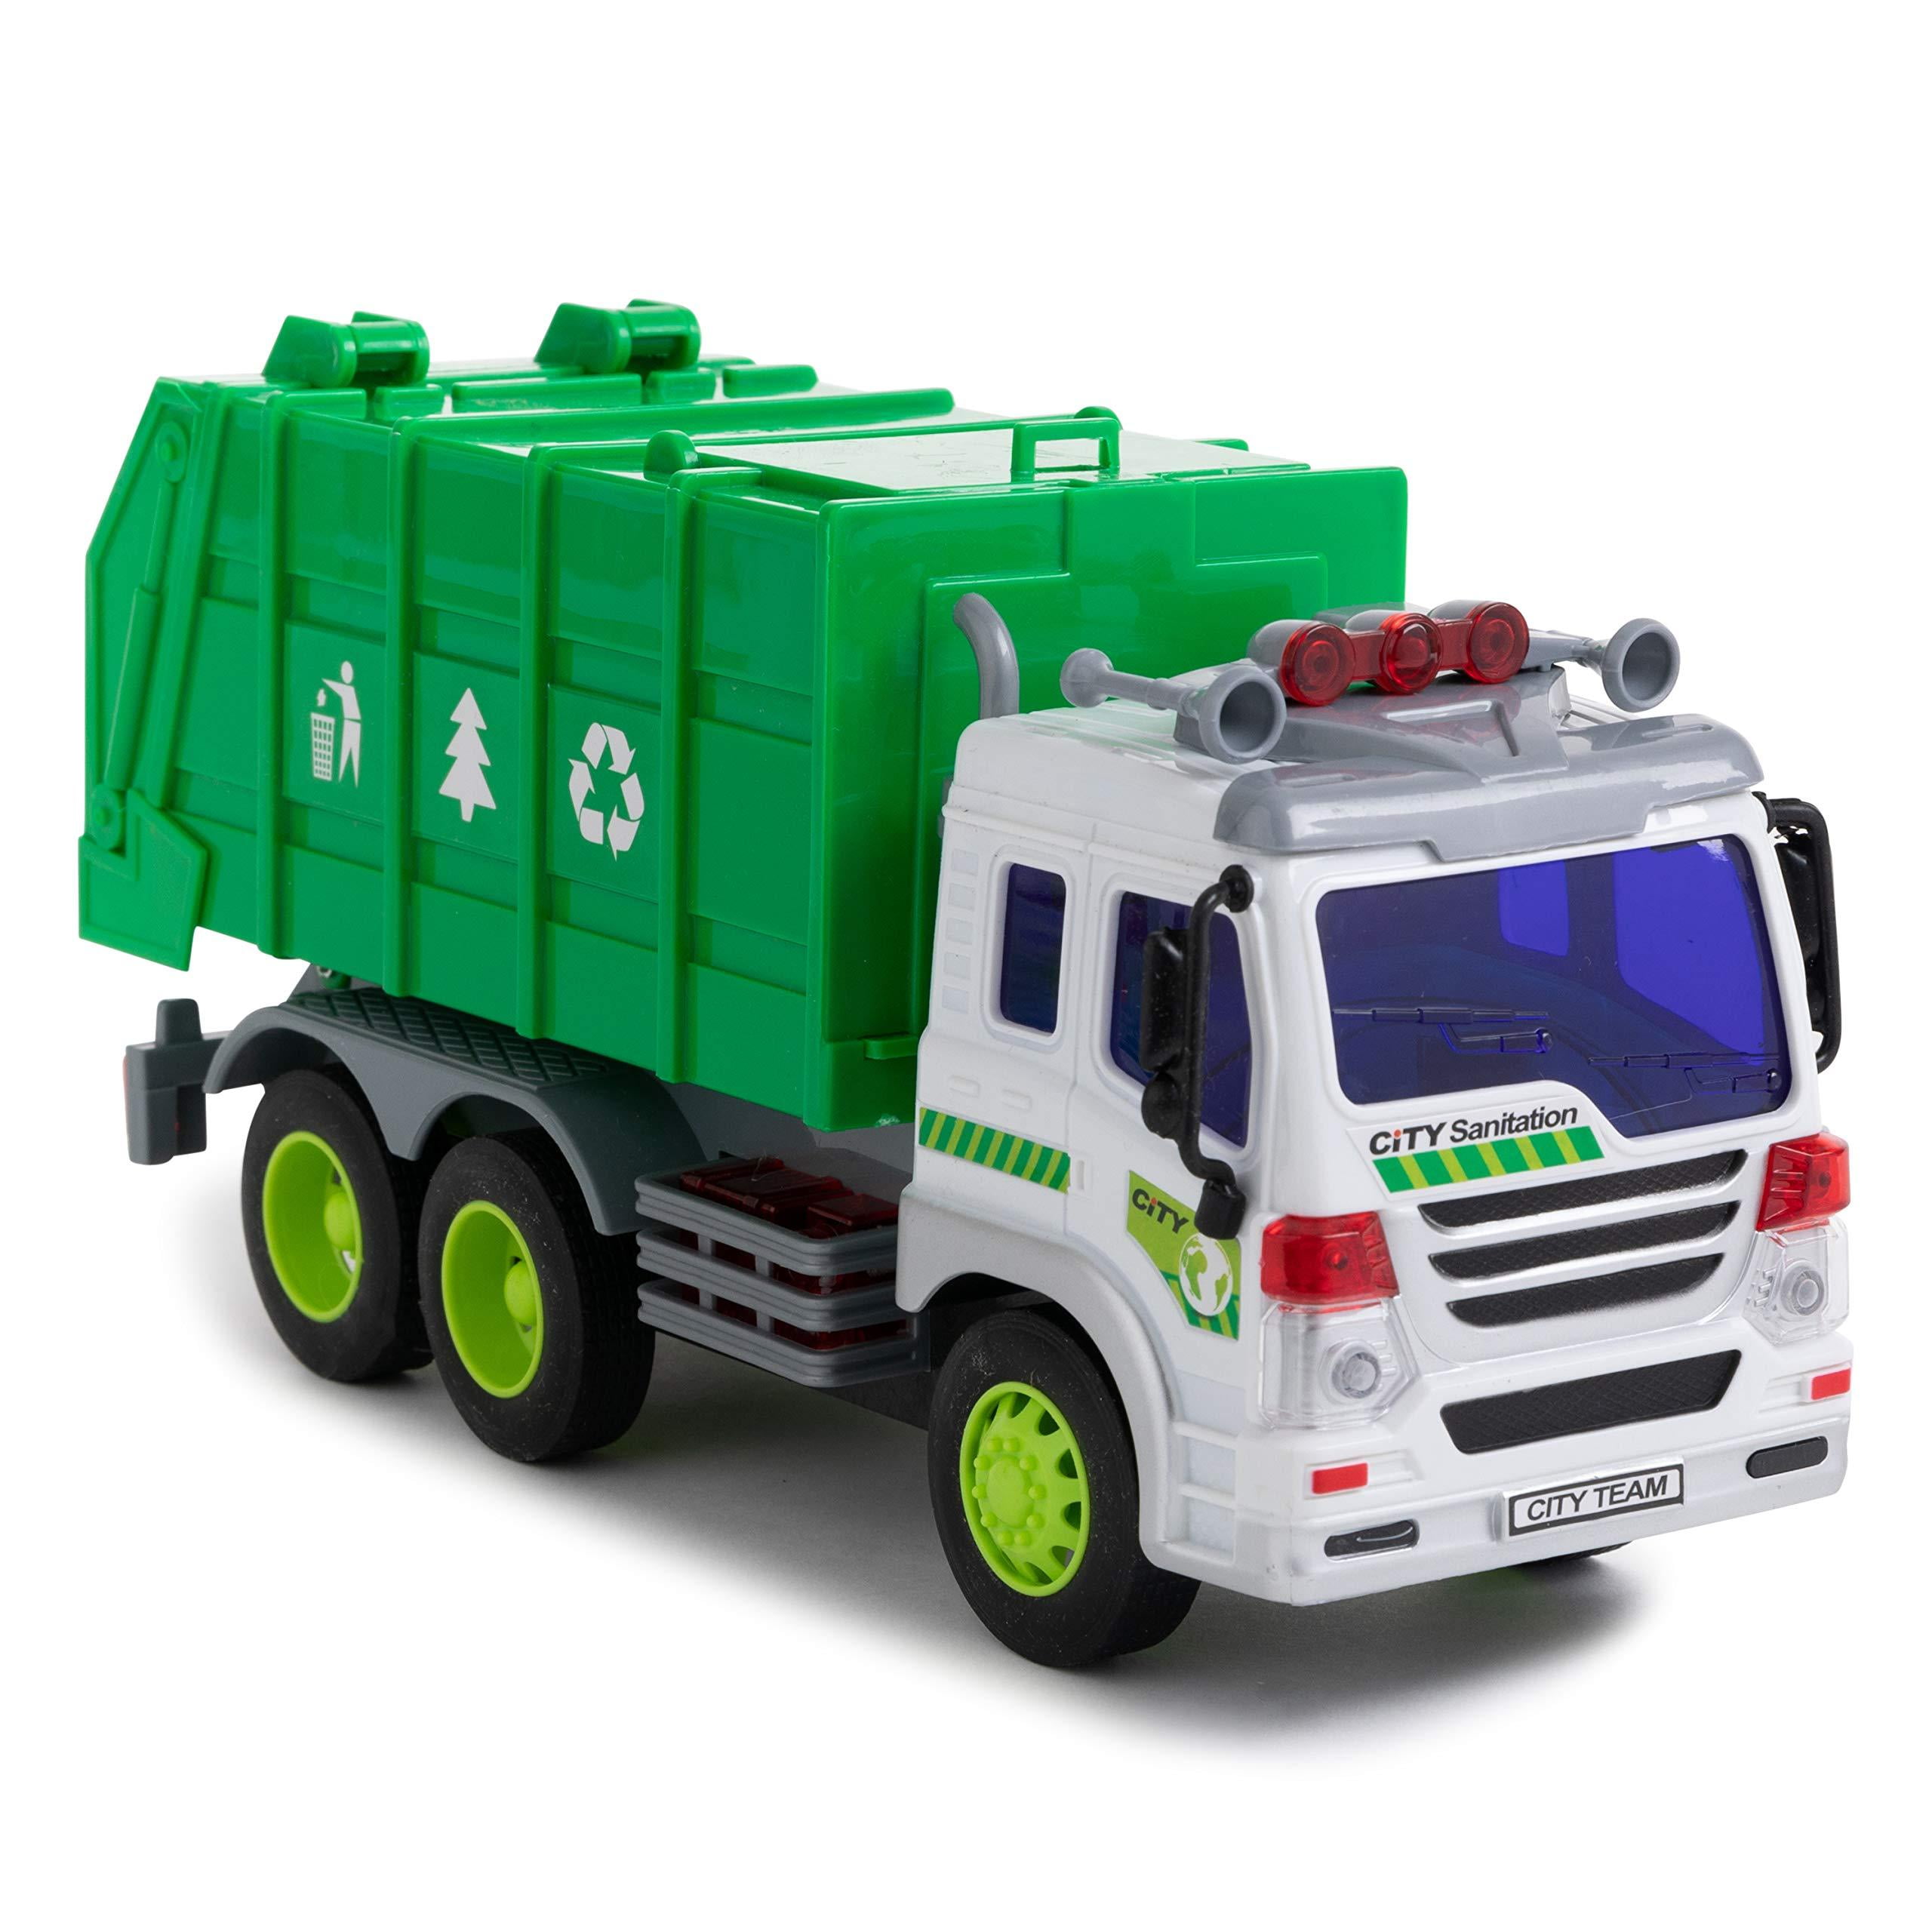 PERSONALISED NAME Gift Green Dust Bin Lorry Garbage Truck Toys Boys Toy Present 